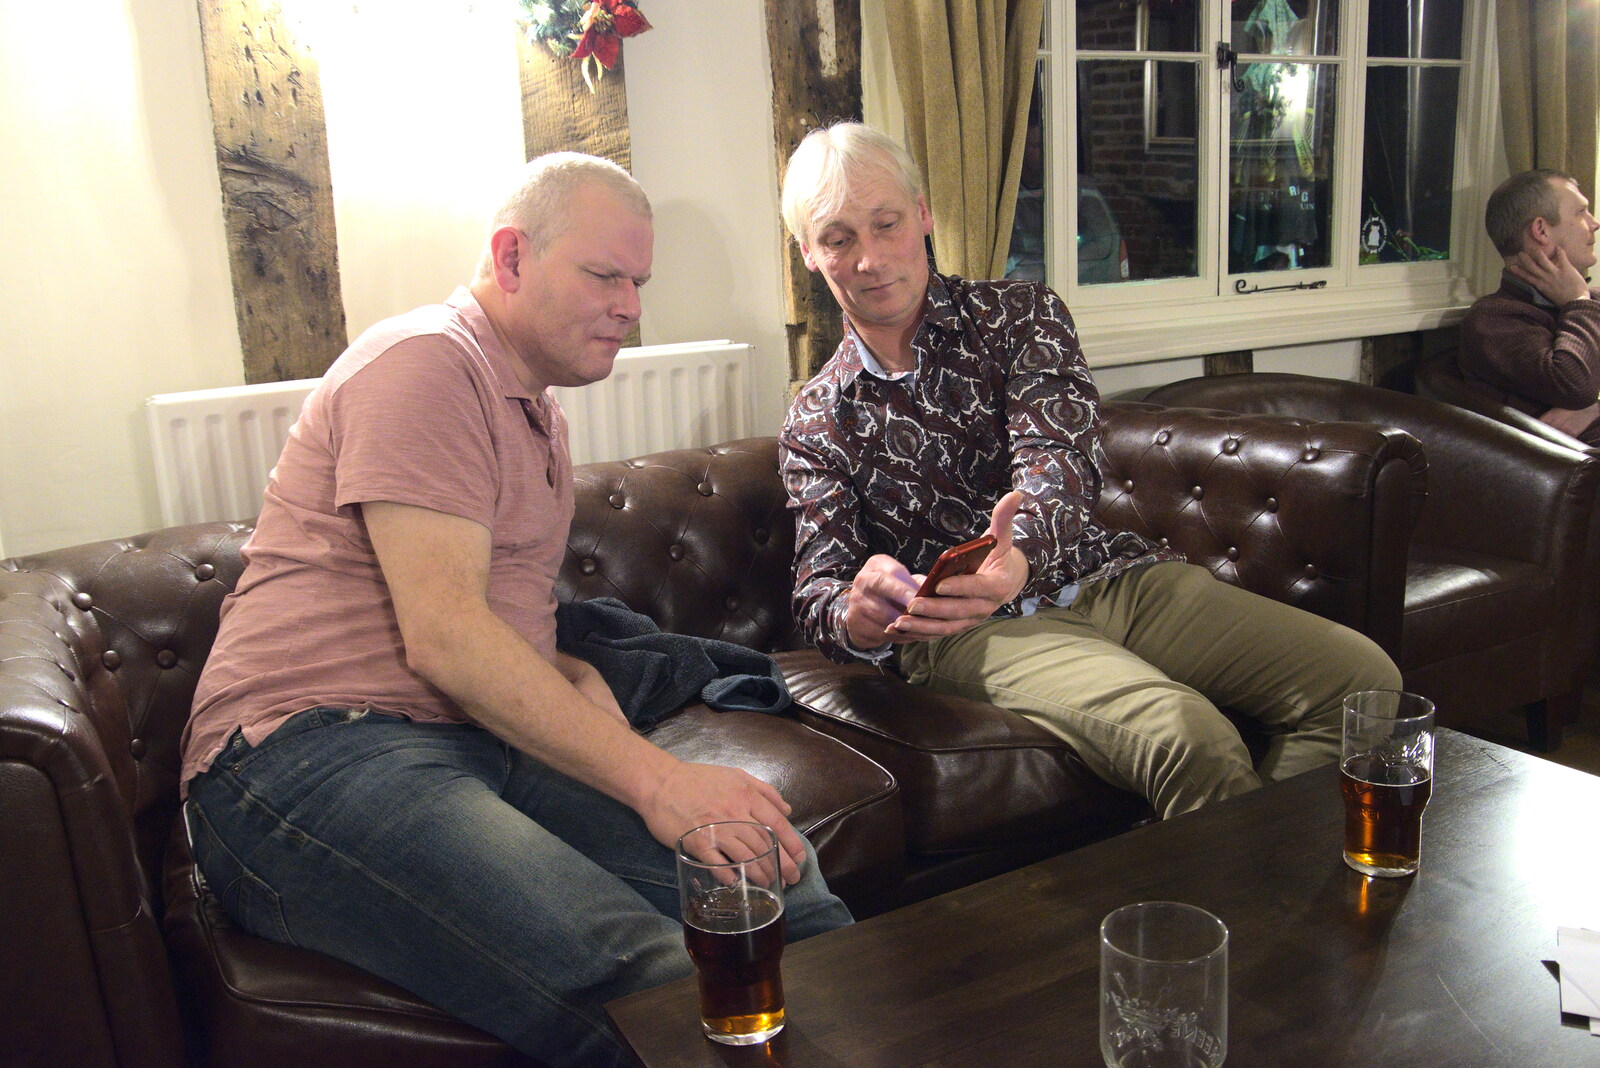 Jimmy shows Bill something on his phone from GSB Carols and Beer With the Lads, Thornham and Thorndon, Suffolk  - 18th December 2021